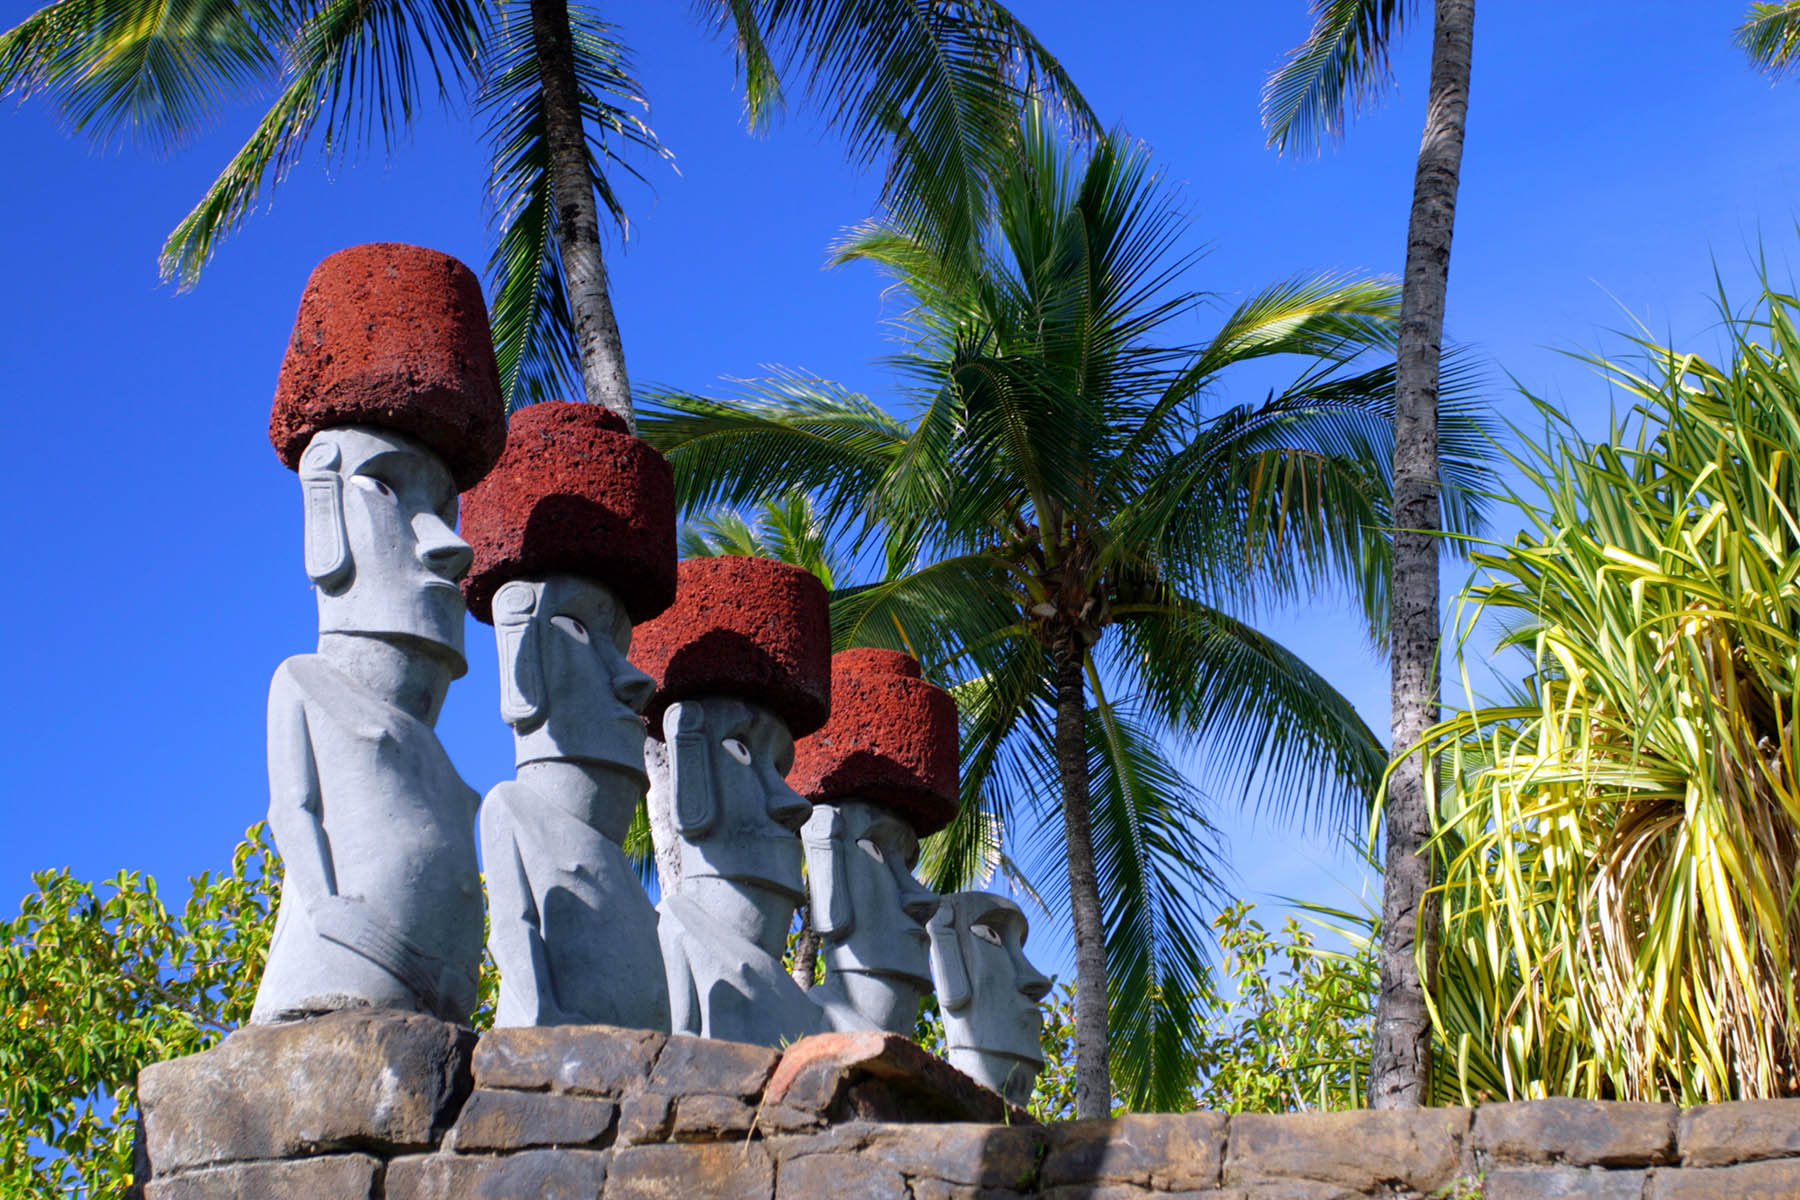 Island Hopping in the Pacific: Experiencing Polynesian Culture